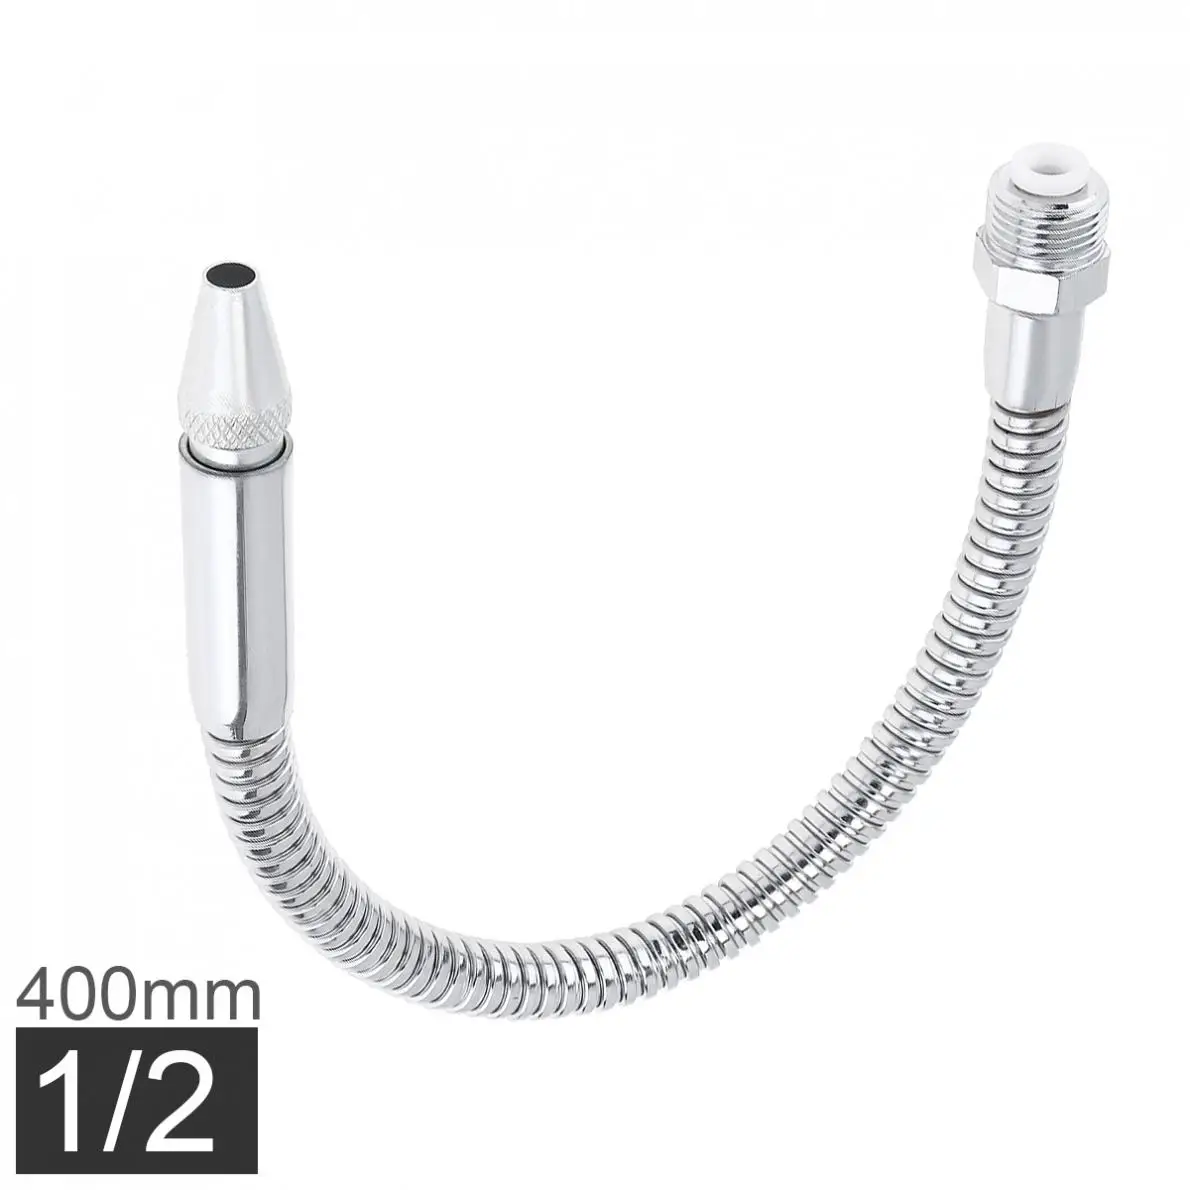 390mm Flexible Cooling Tube Metal Round Nozzle for CNC Machine Milling Lathe 